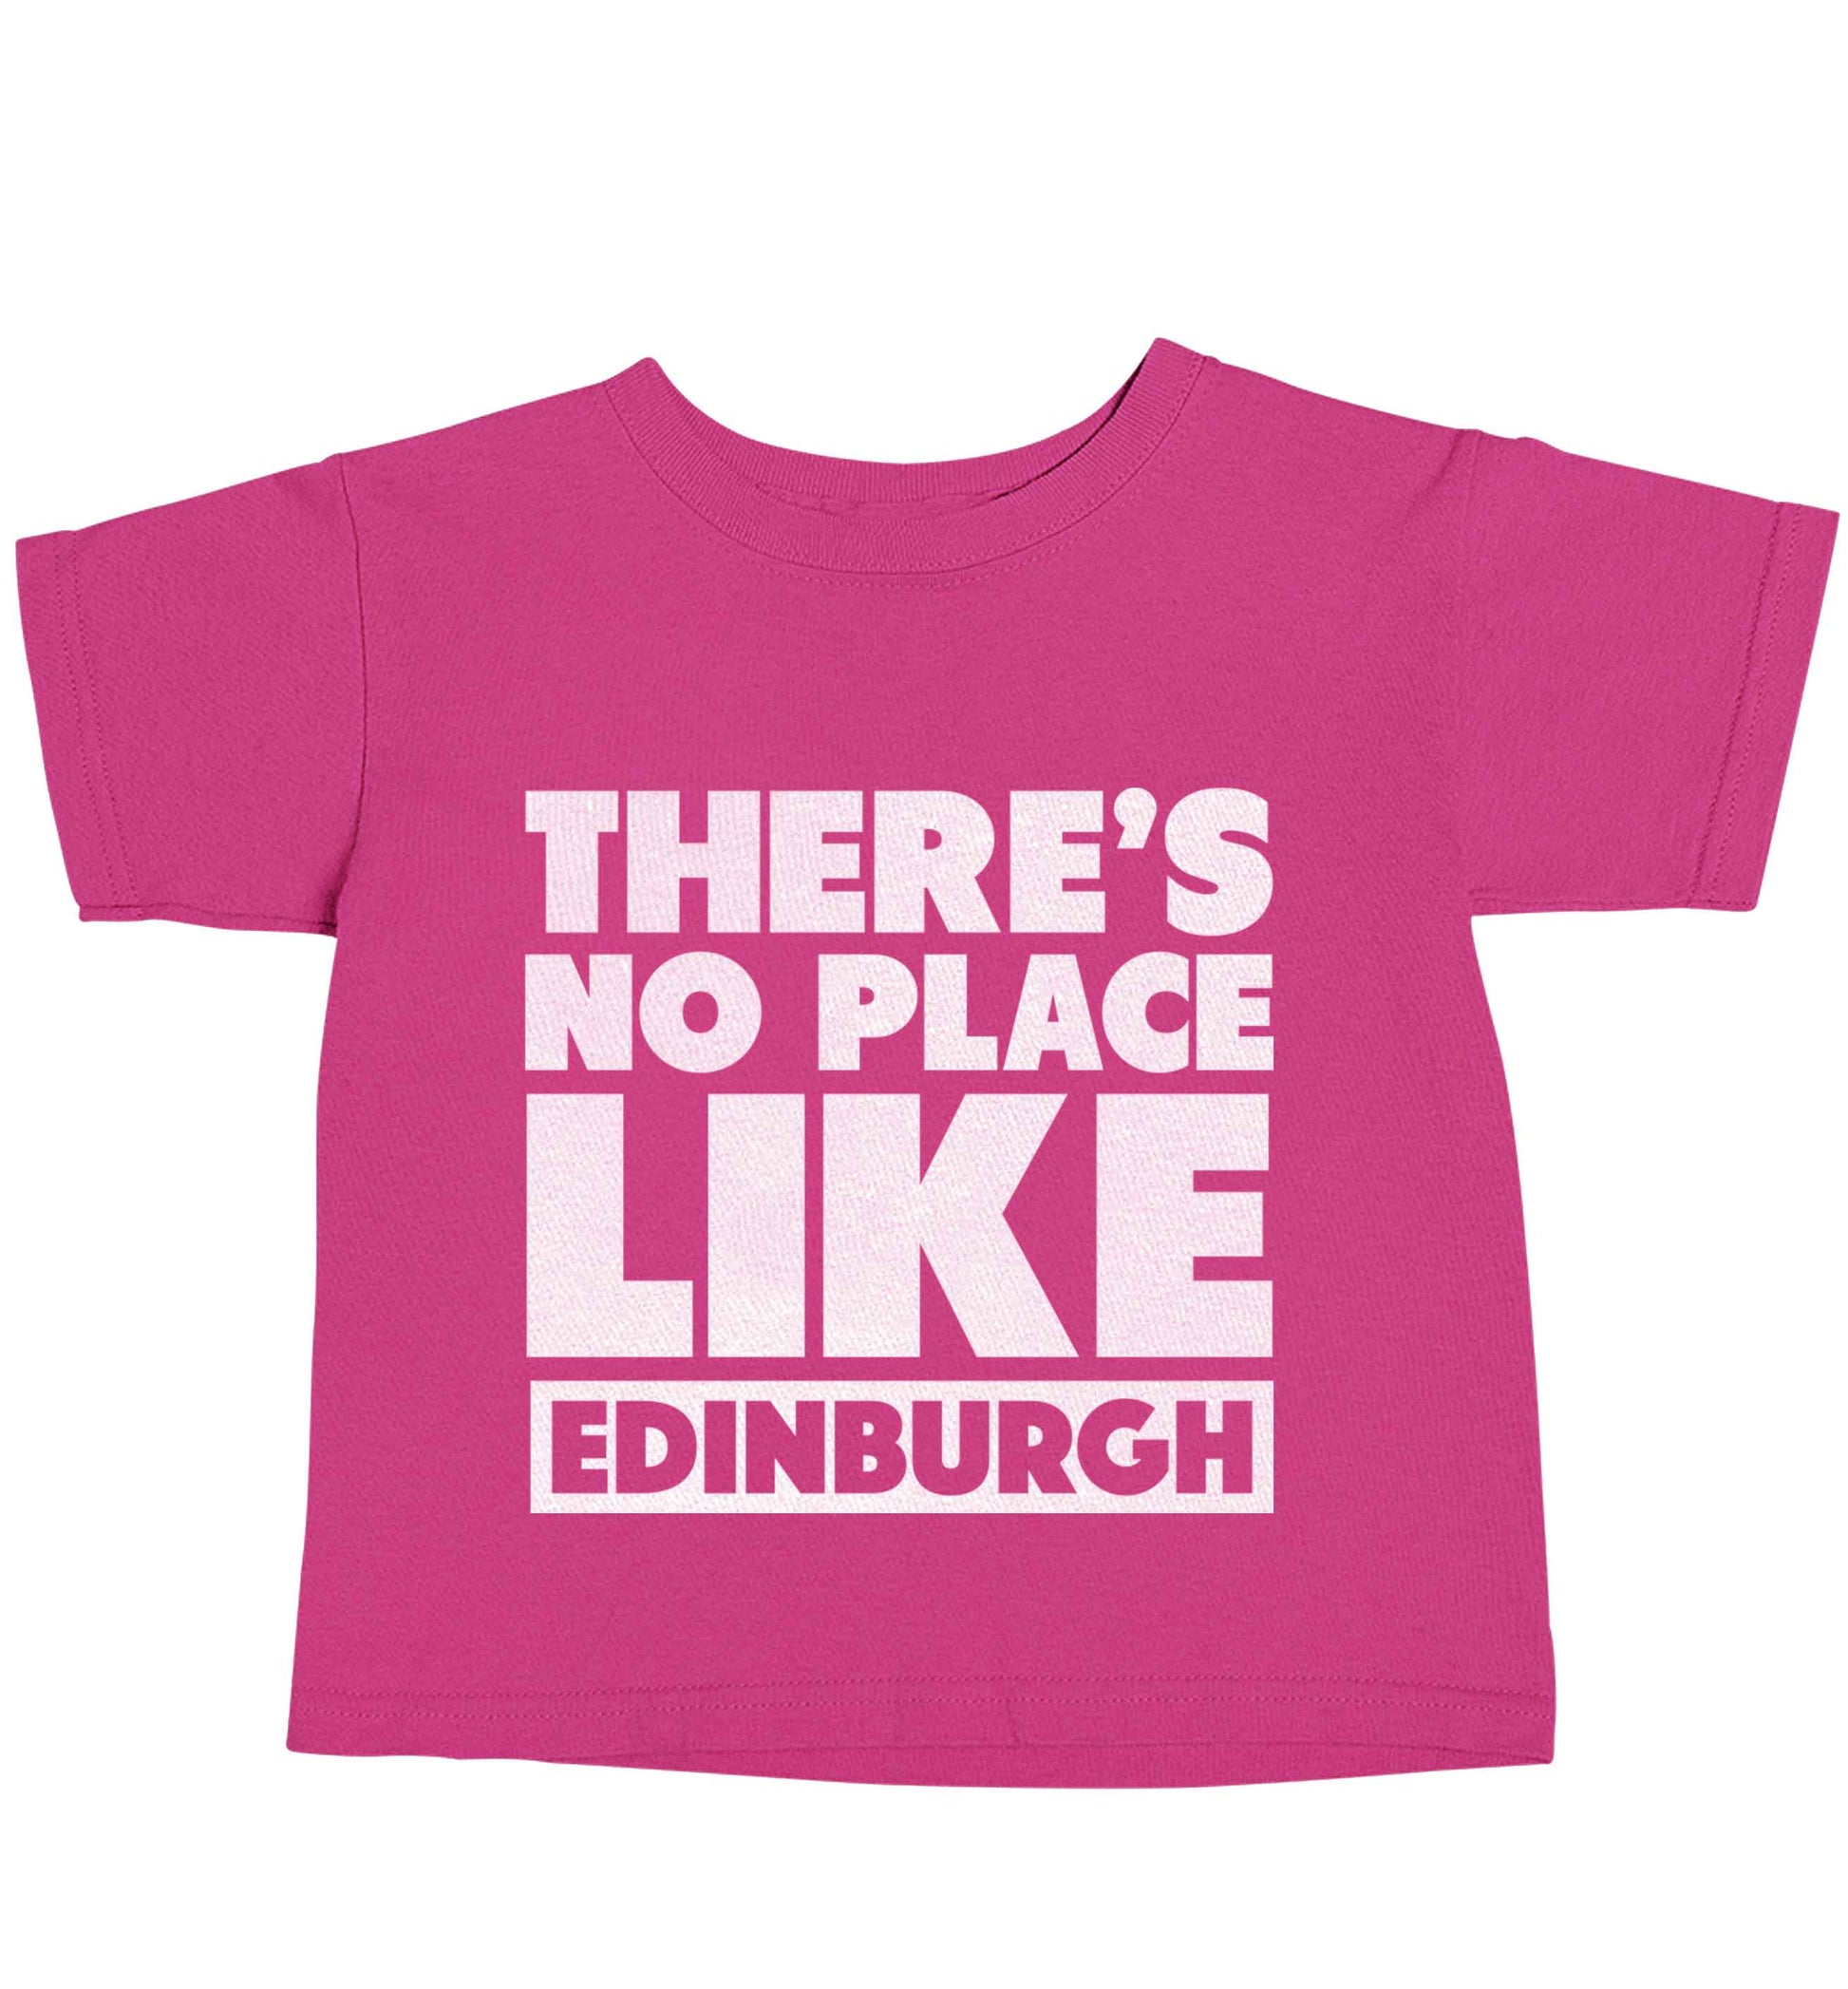 There's no place like Edinburgh pink baby toddler Tshirt 2 Years